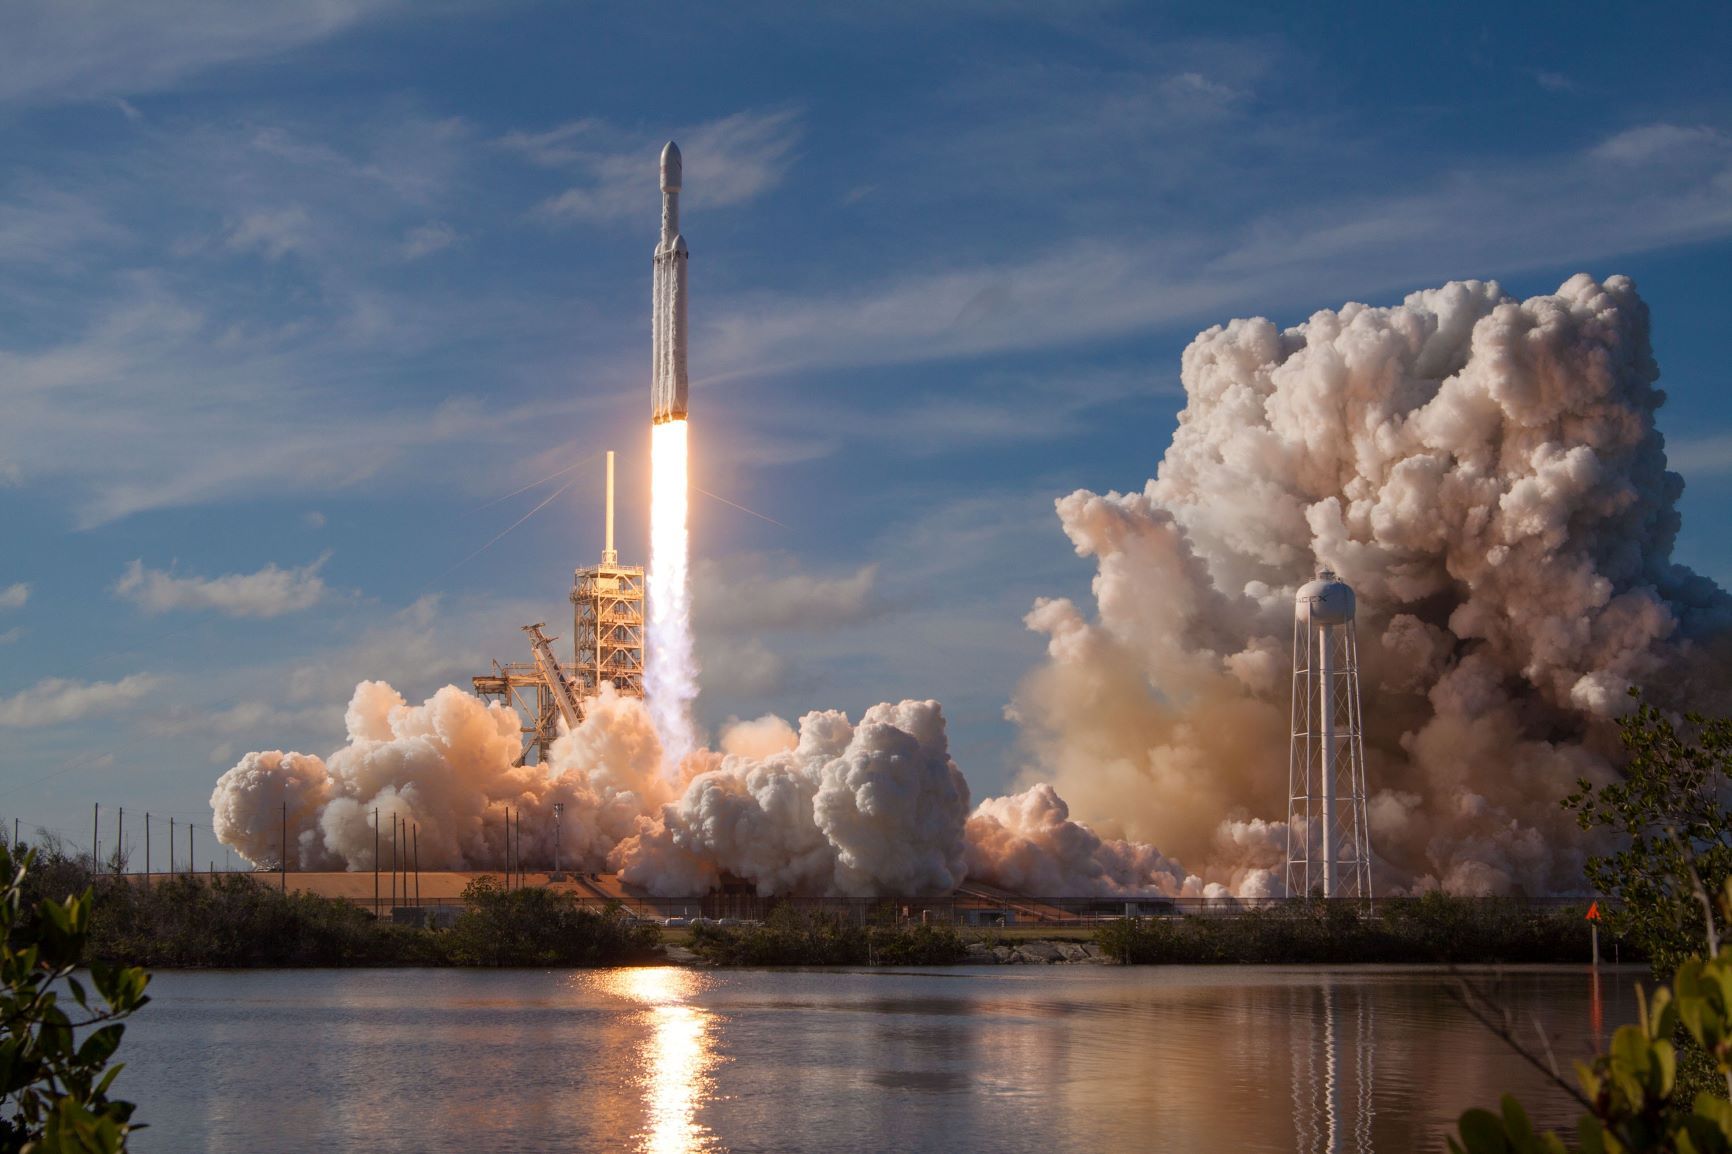 ContentGrow’s new features give rocket fuel to publishers